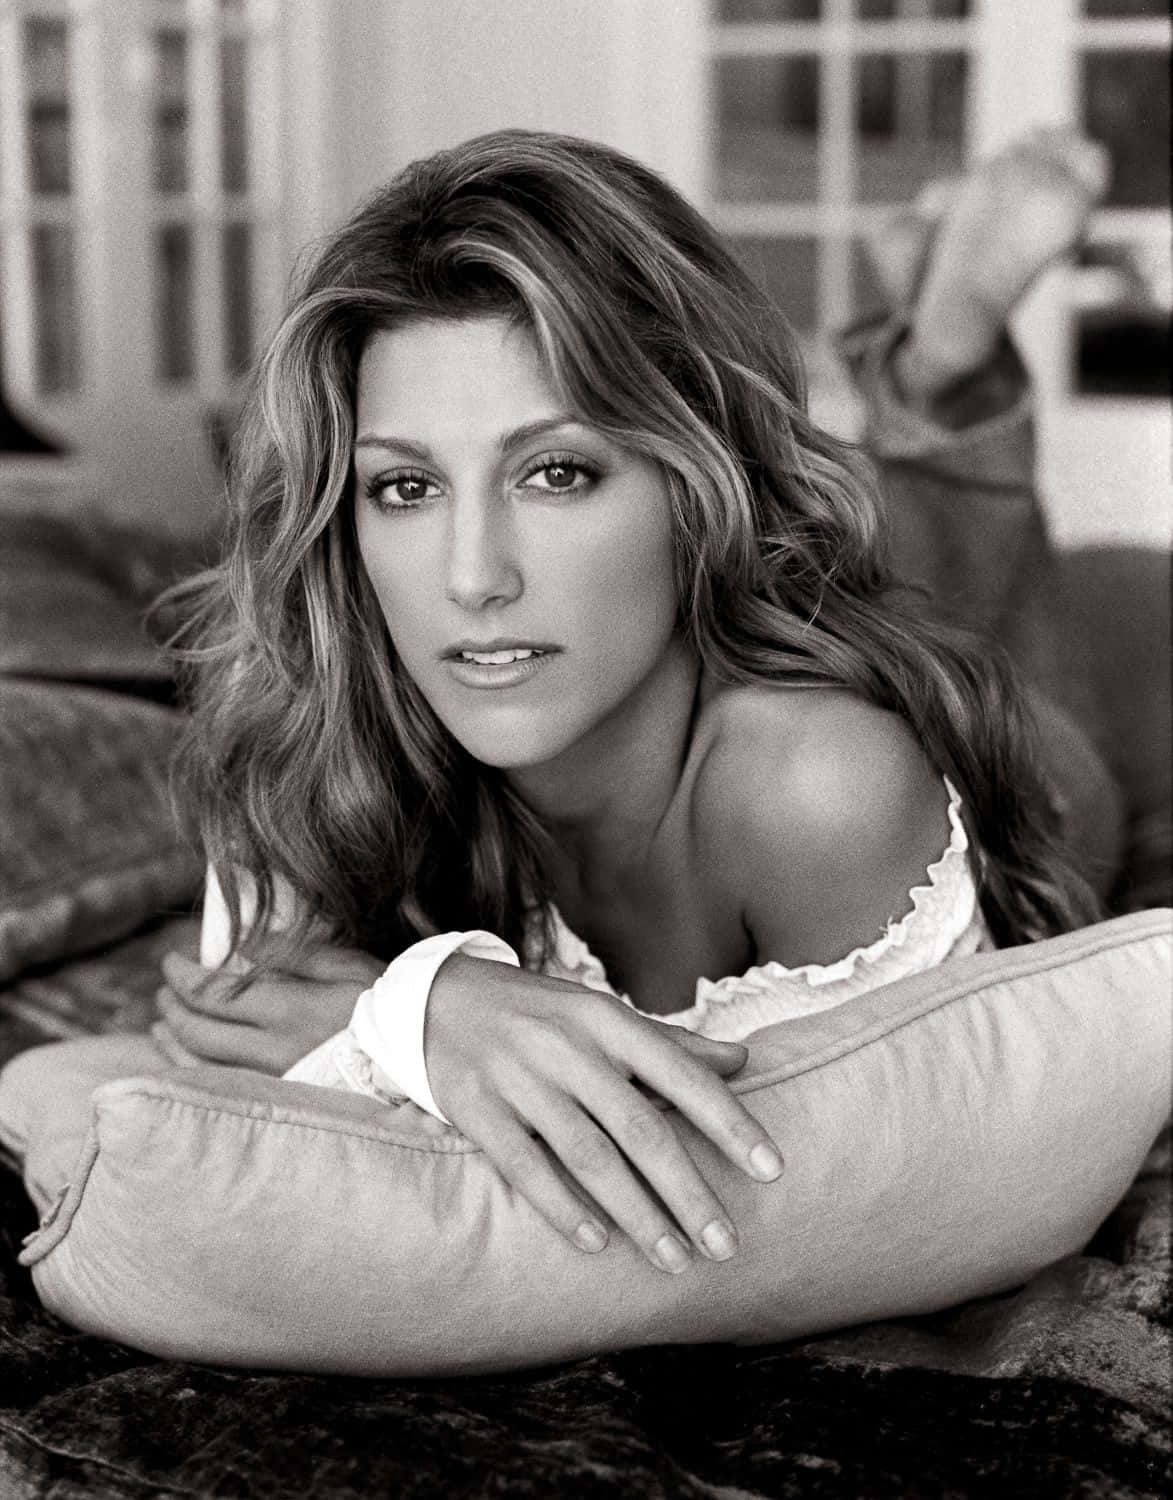 Jennifer Esposito posing in a stylish outfit Wallpaper